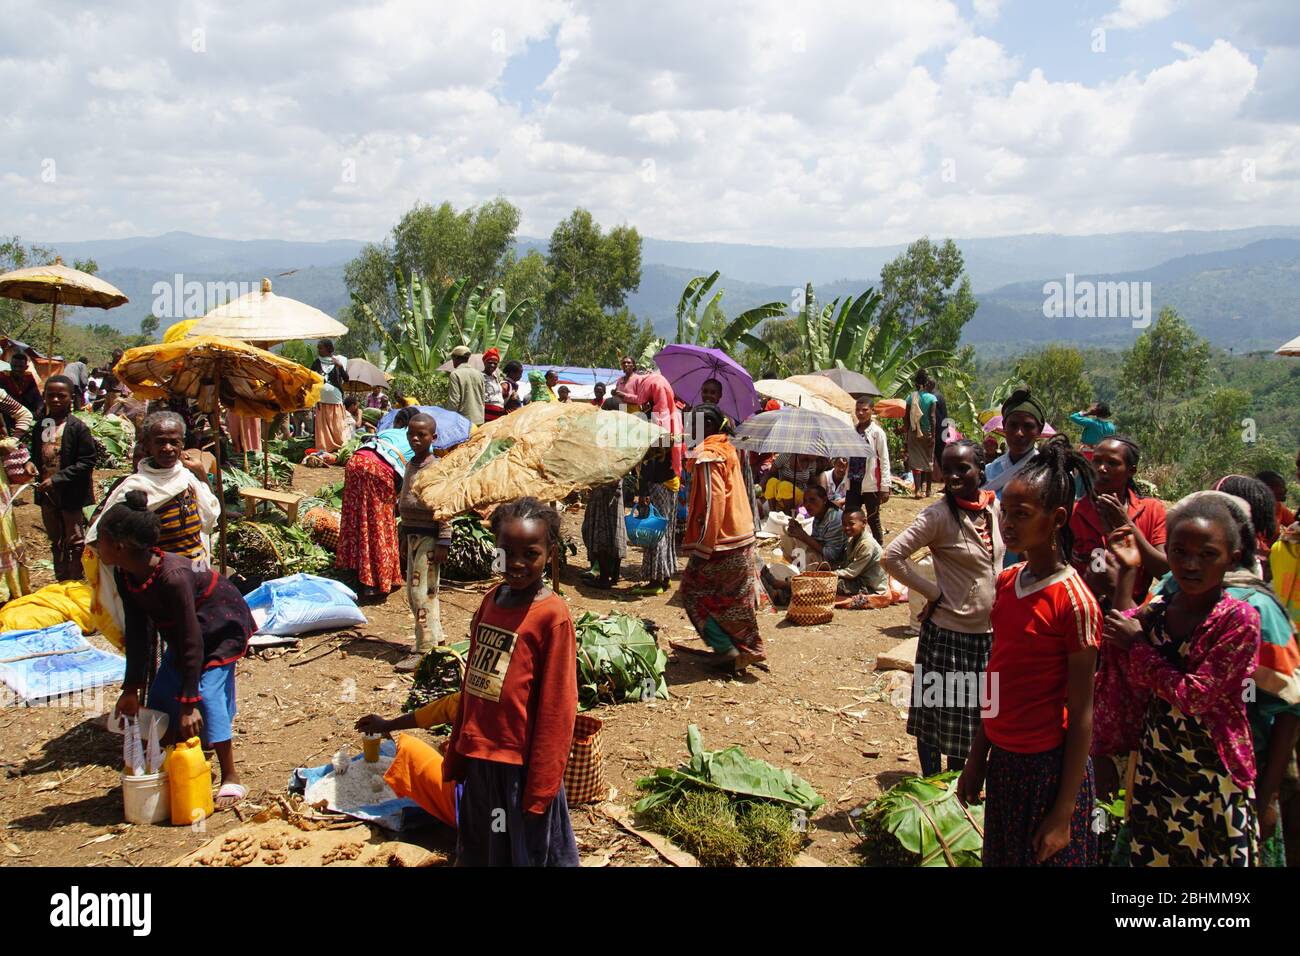 Colorful tribal Market in Ethiopia’s Rift Valley Stock Photo